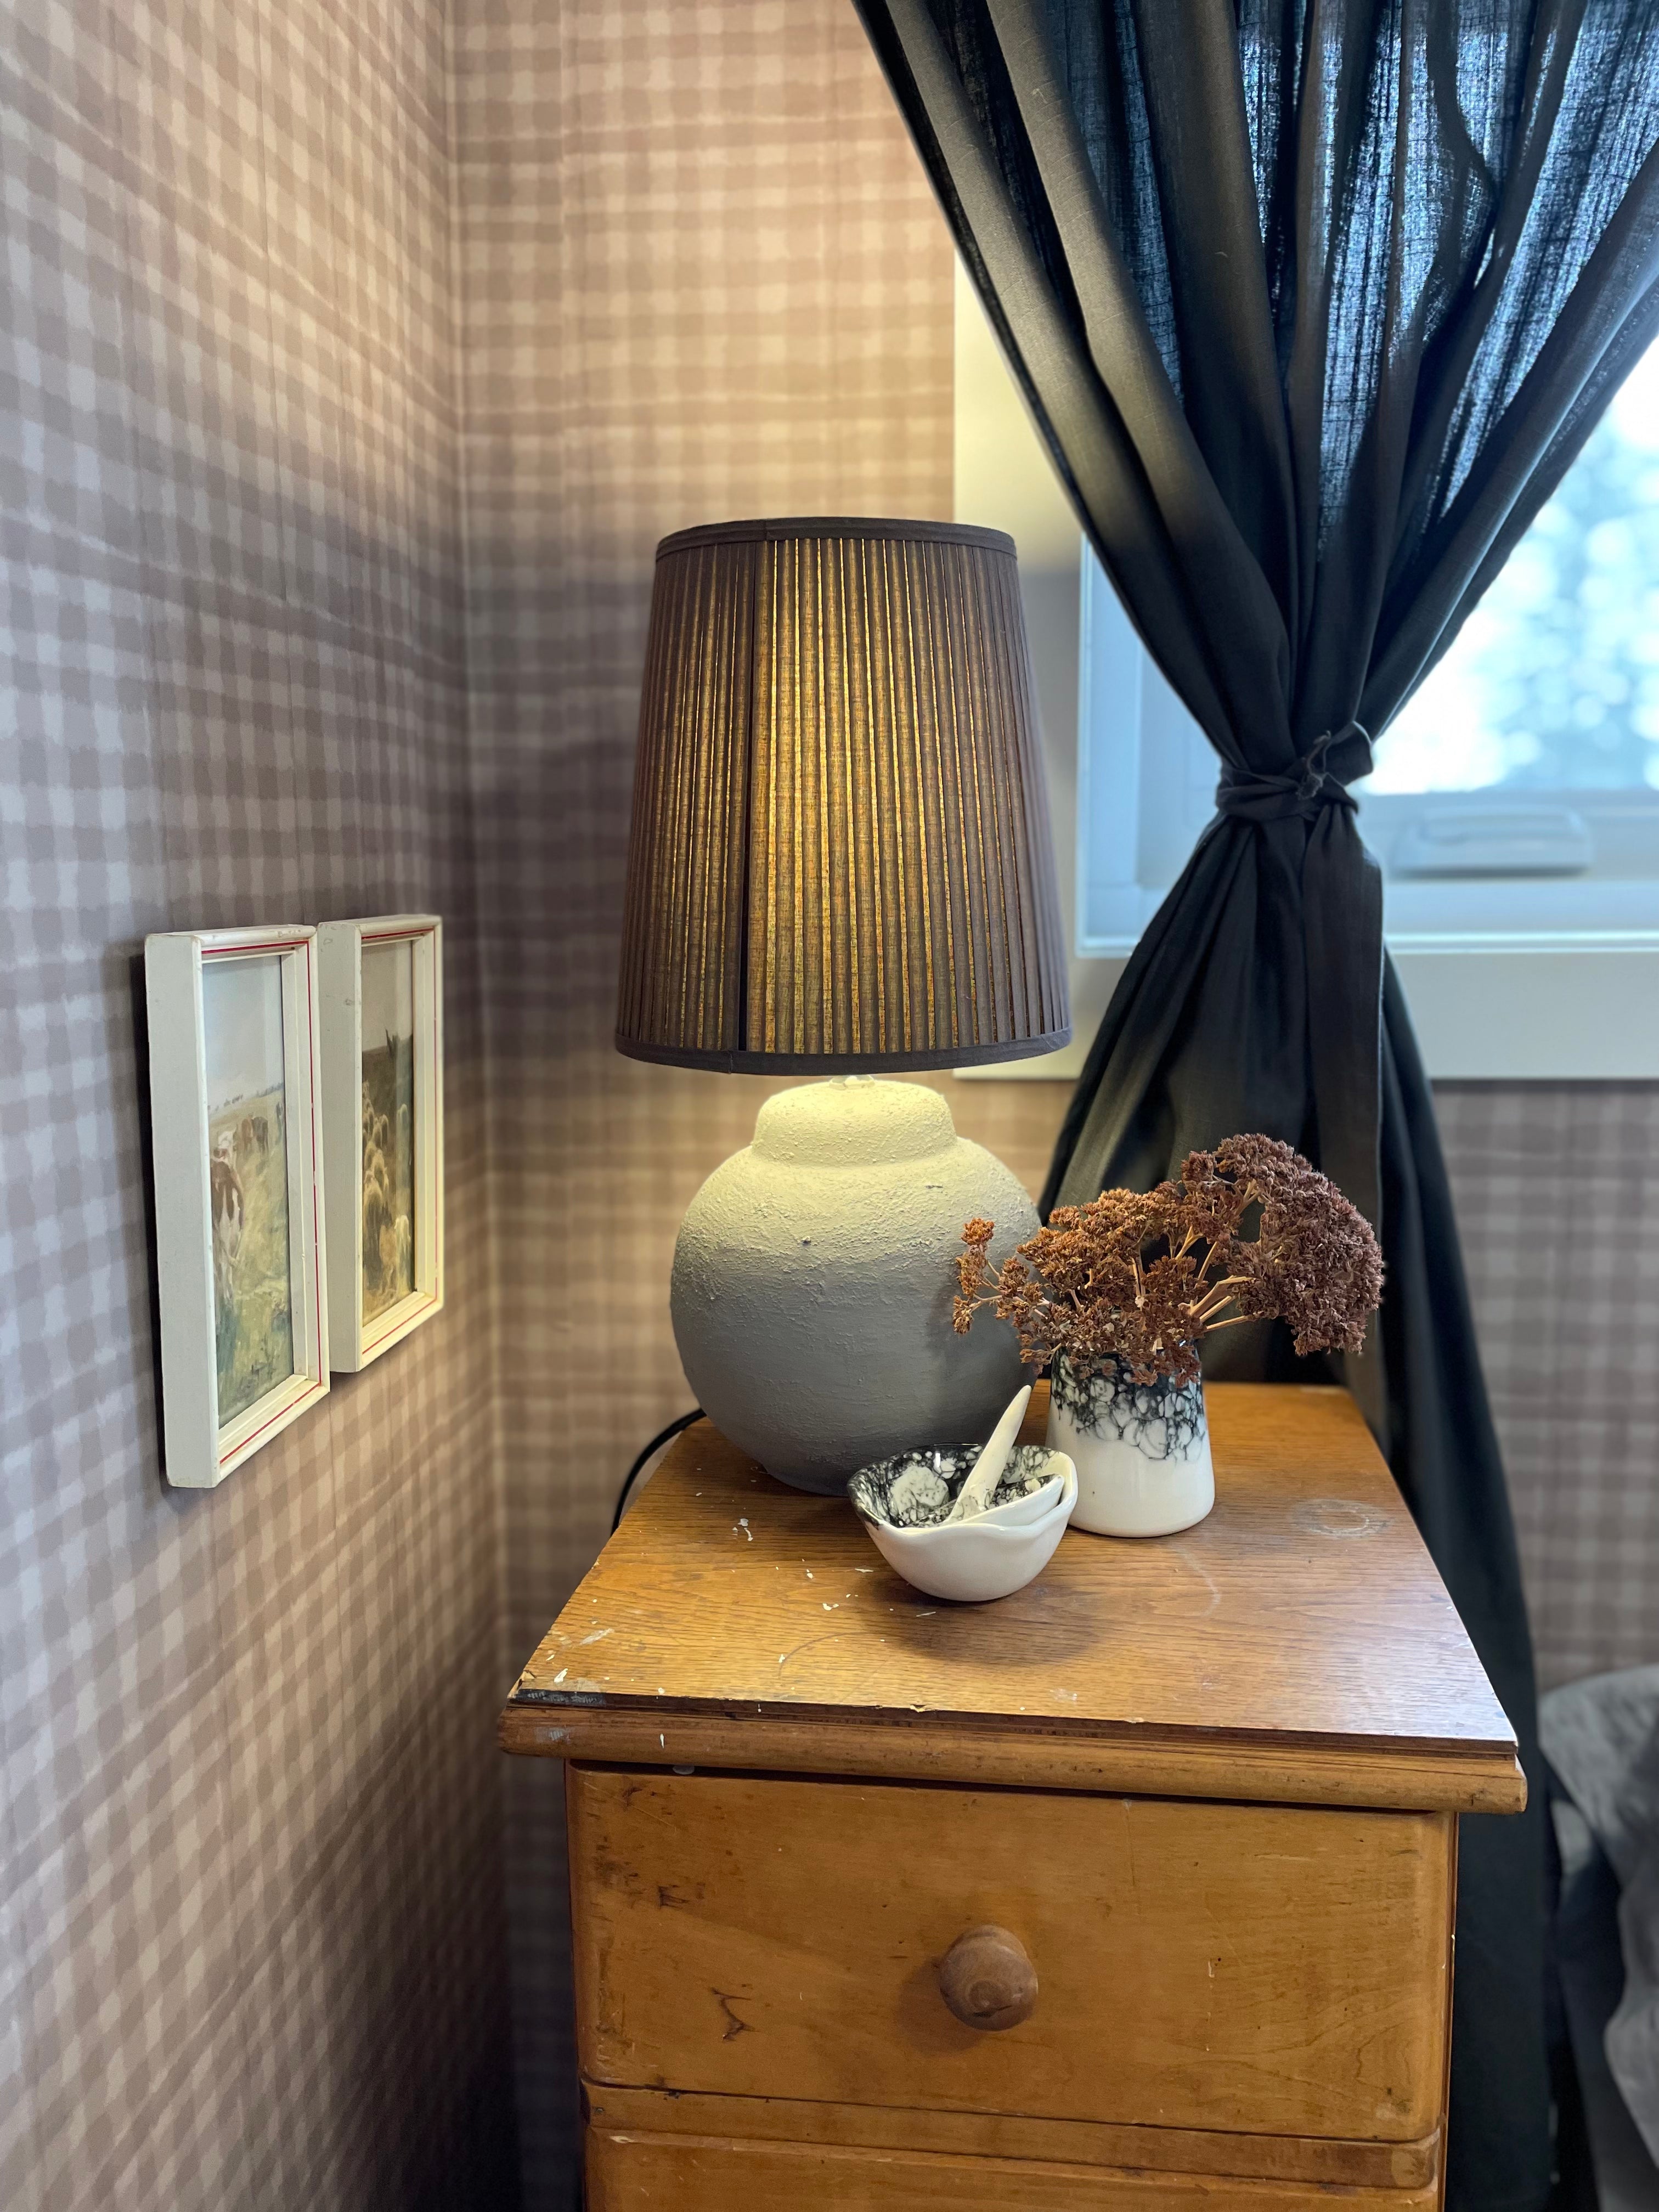 A vintage styled room featuring a lamp, dried flowers, and framed pictures, with mini plaid wallpaper adding texture to the space.